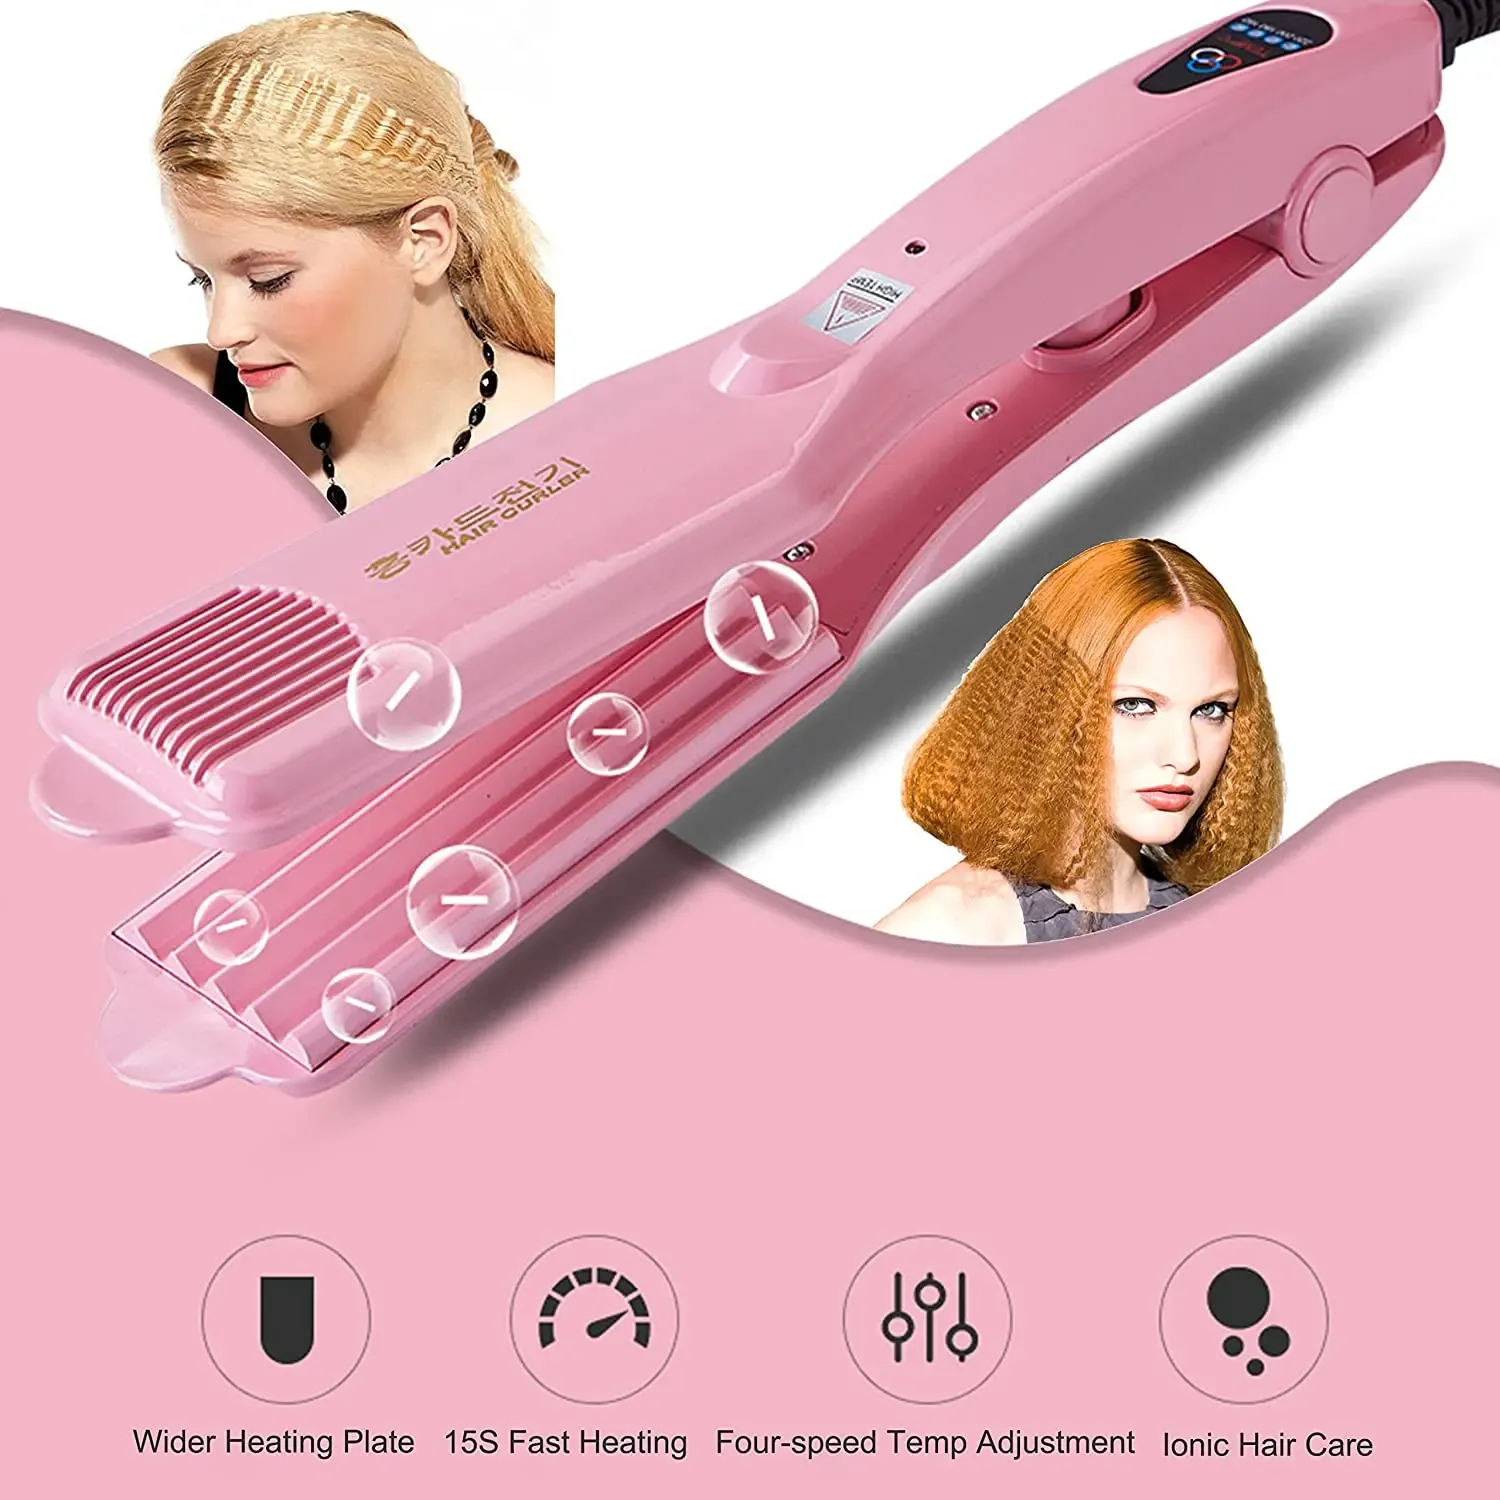 Irons Ceramic Hair Corrugated Flat Fluffy Hairstyle Wide Plates Fast Hair Crimper Flat Iron Curling Wave Volumizing Styler Salon Tool